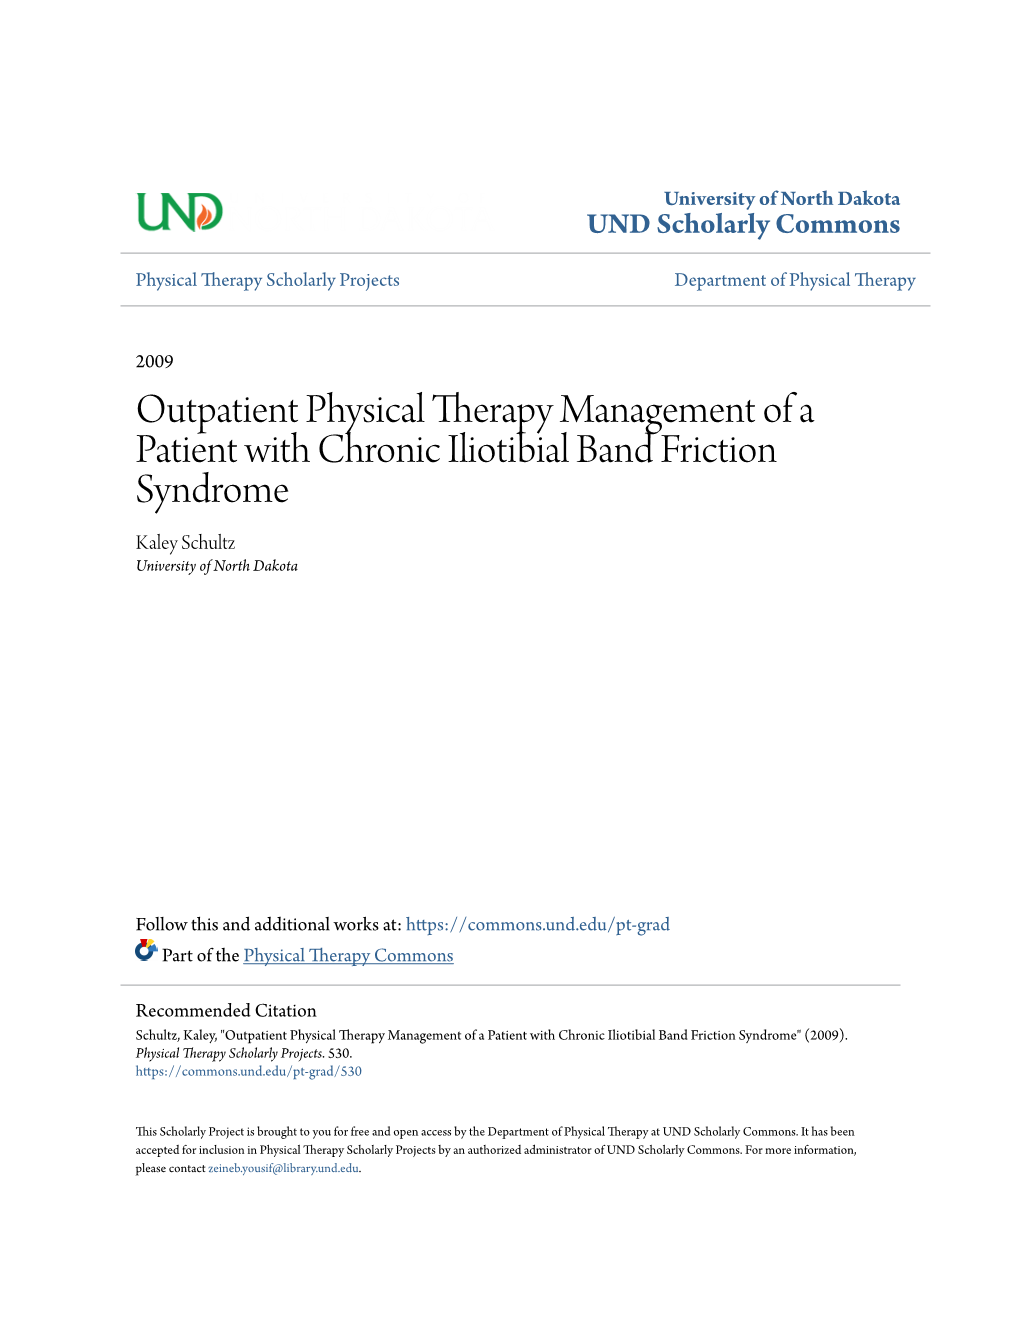 Outpatient Physical Therapy Management of a Patient with Chronic Iliotibial Band Friction Syndrome Kaley Schultz University of North Dakota